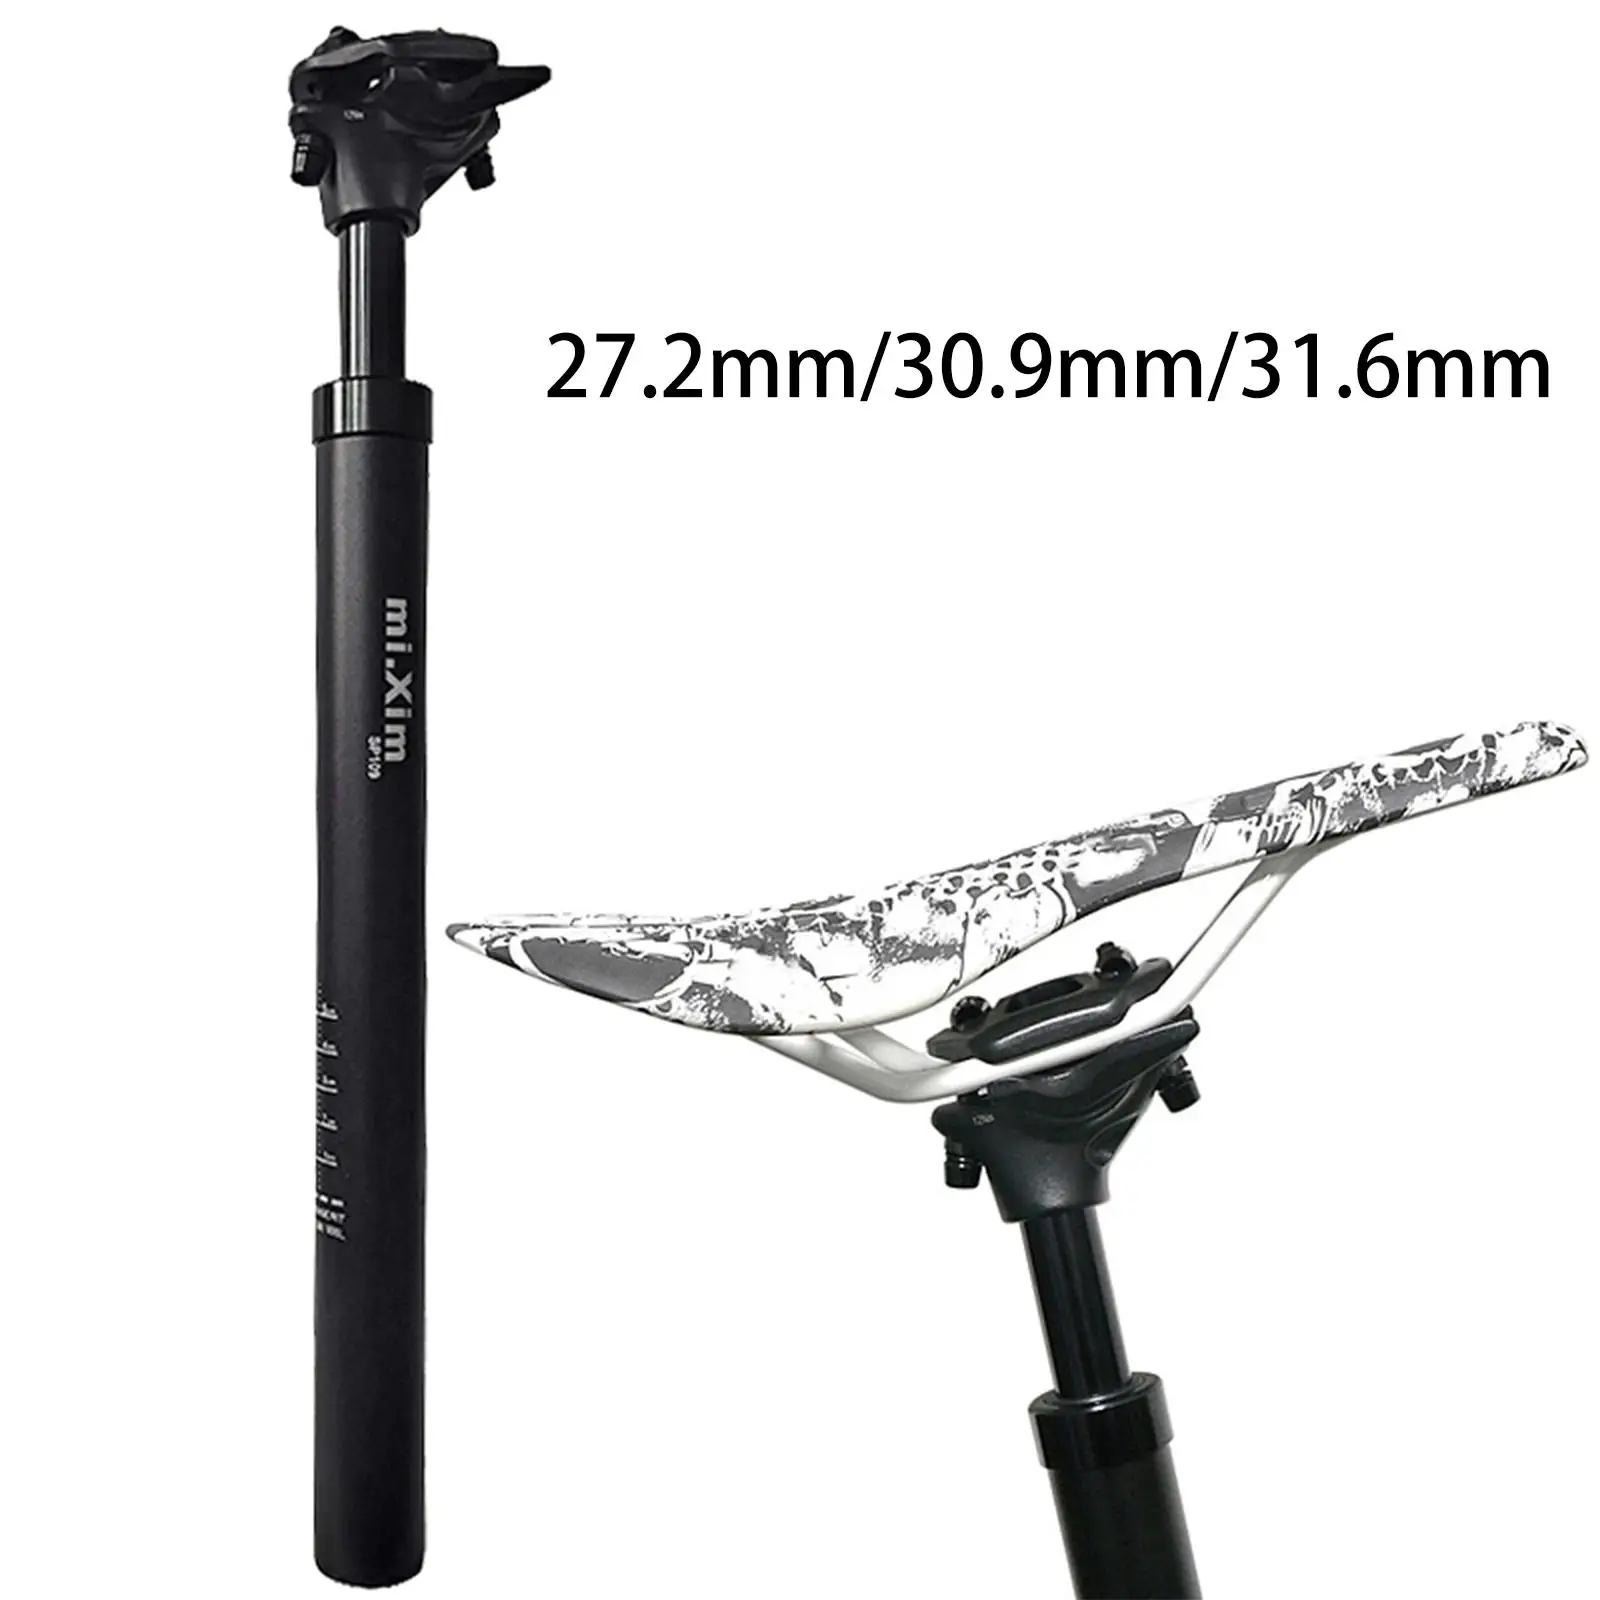 Bike Seatpost Shock Absorber 400mm Seat Post Tube Road Bike BMX Bike Replacement Accessory Parts